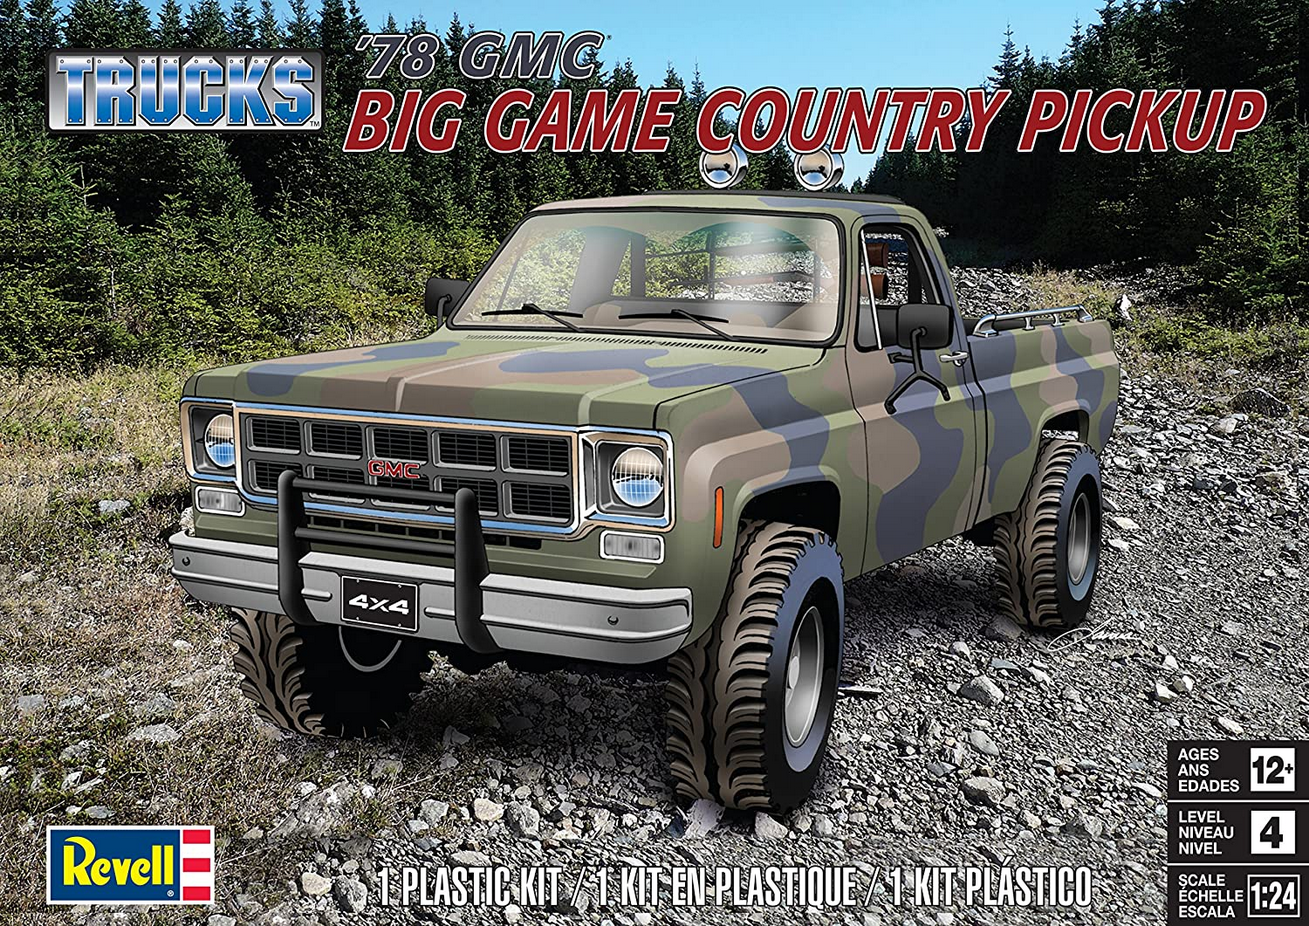 1978 GMC Big Game Country Pickup - REVELL 1/24